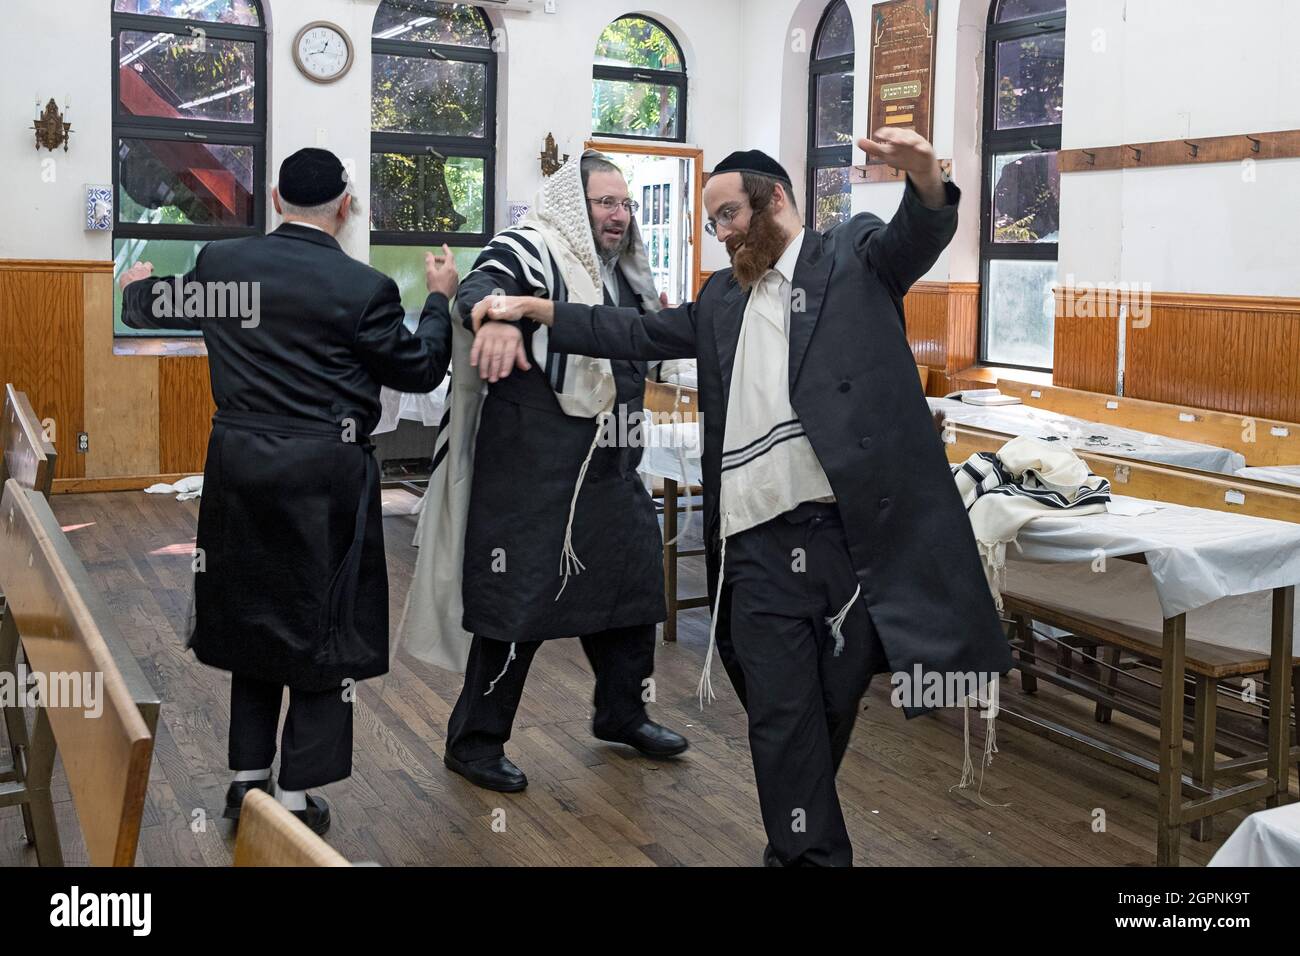 Orthodox Jewish men dance to celebrate the joyous holiday of Sukkos. In a synagogue in Williamsburg, Brooklyn, New York City. Stock Photo